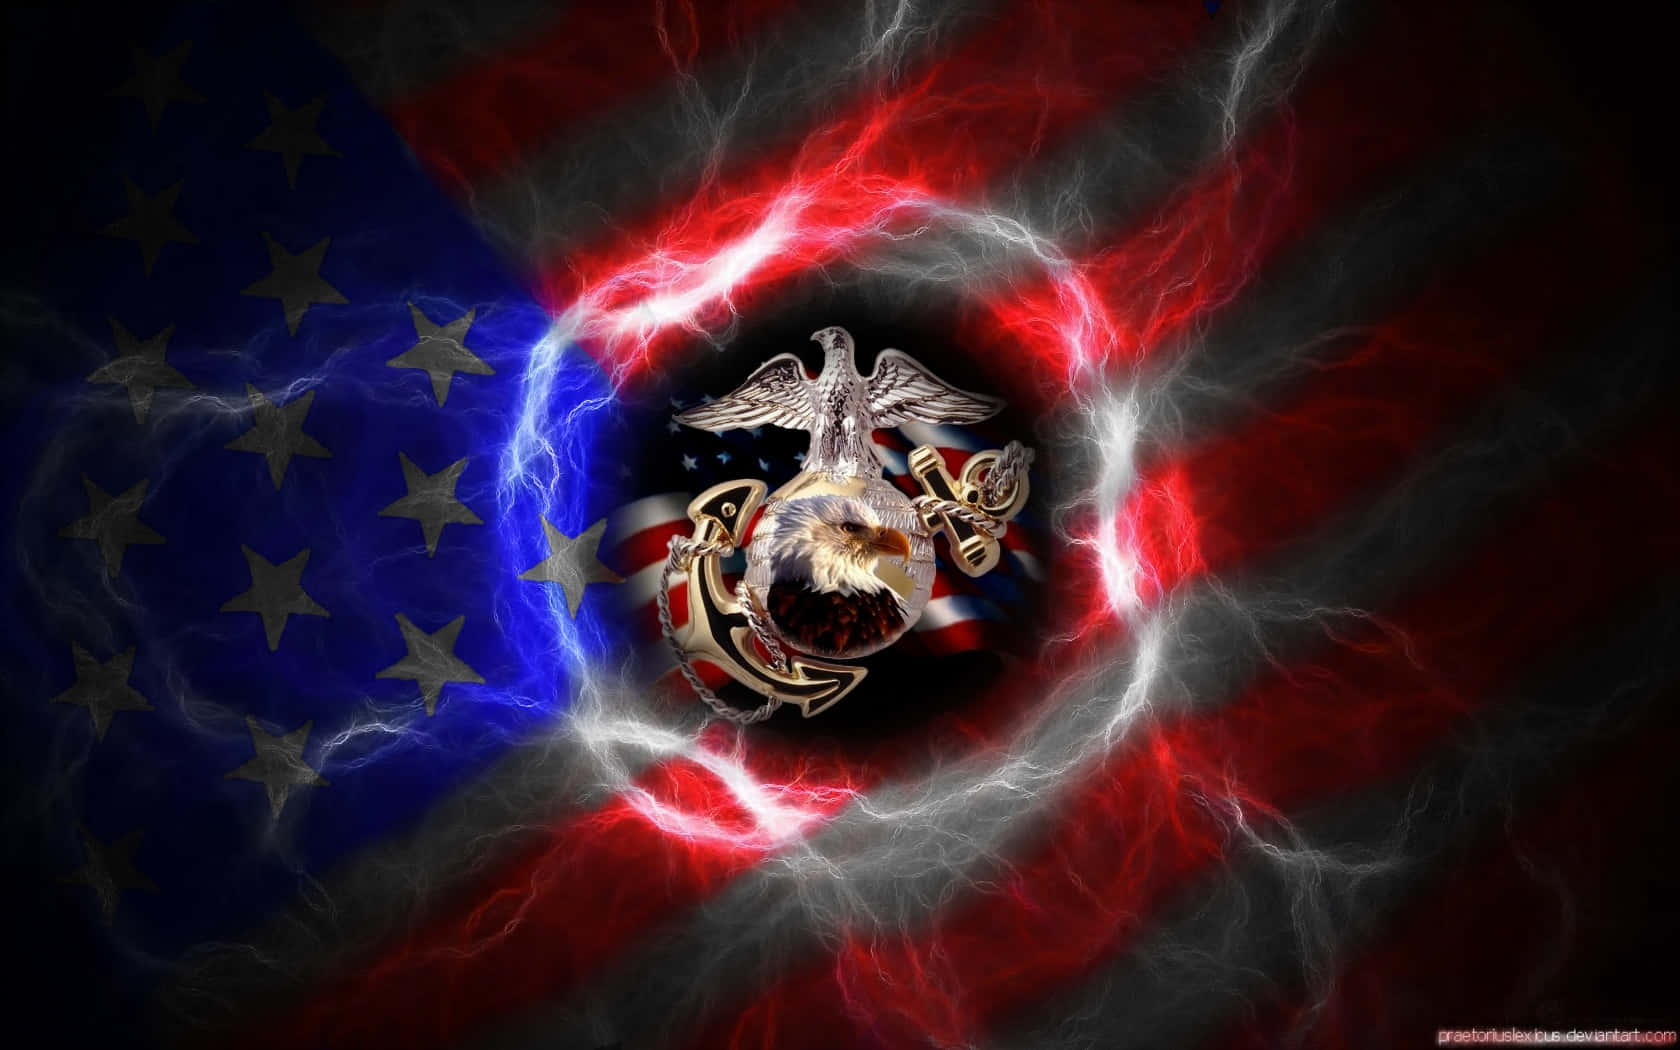 Proud of Your Service - Marine Corps Outdoors Wallpaper